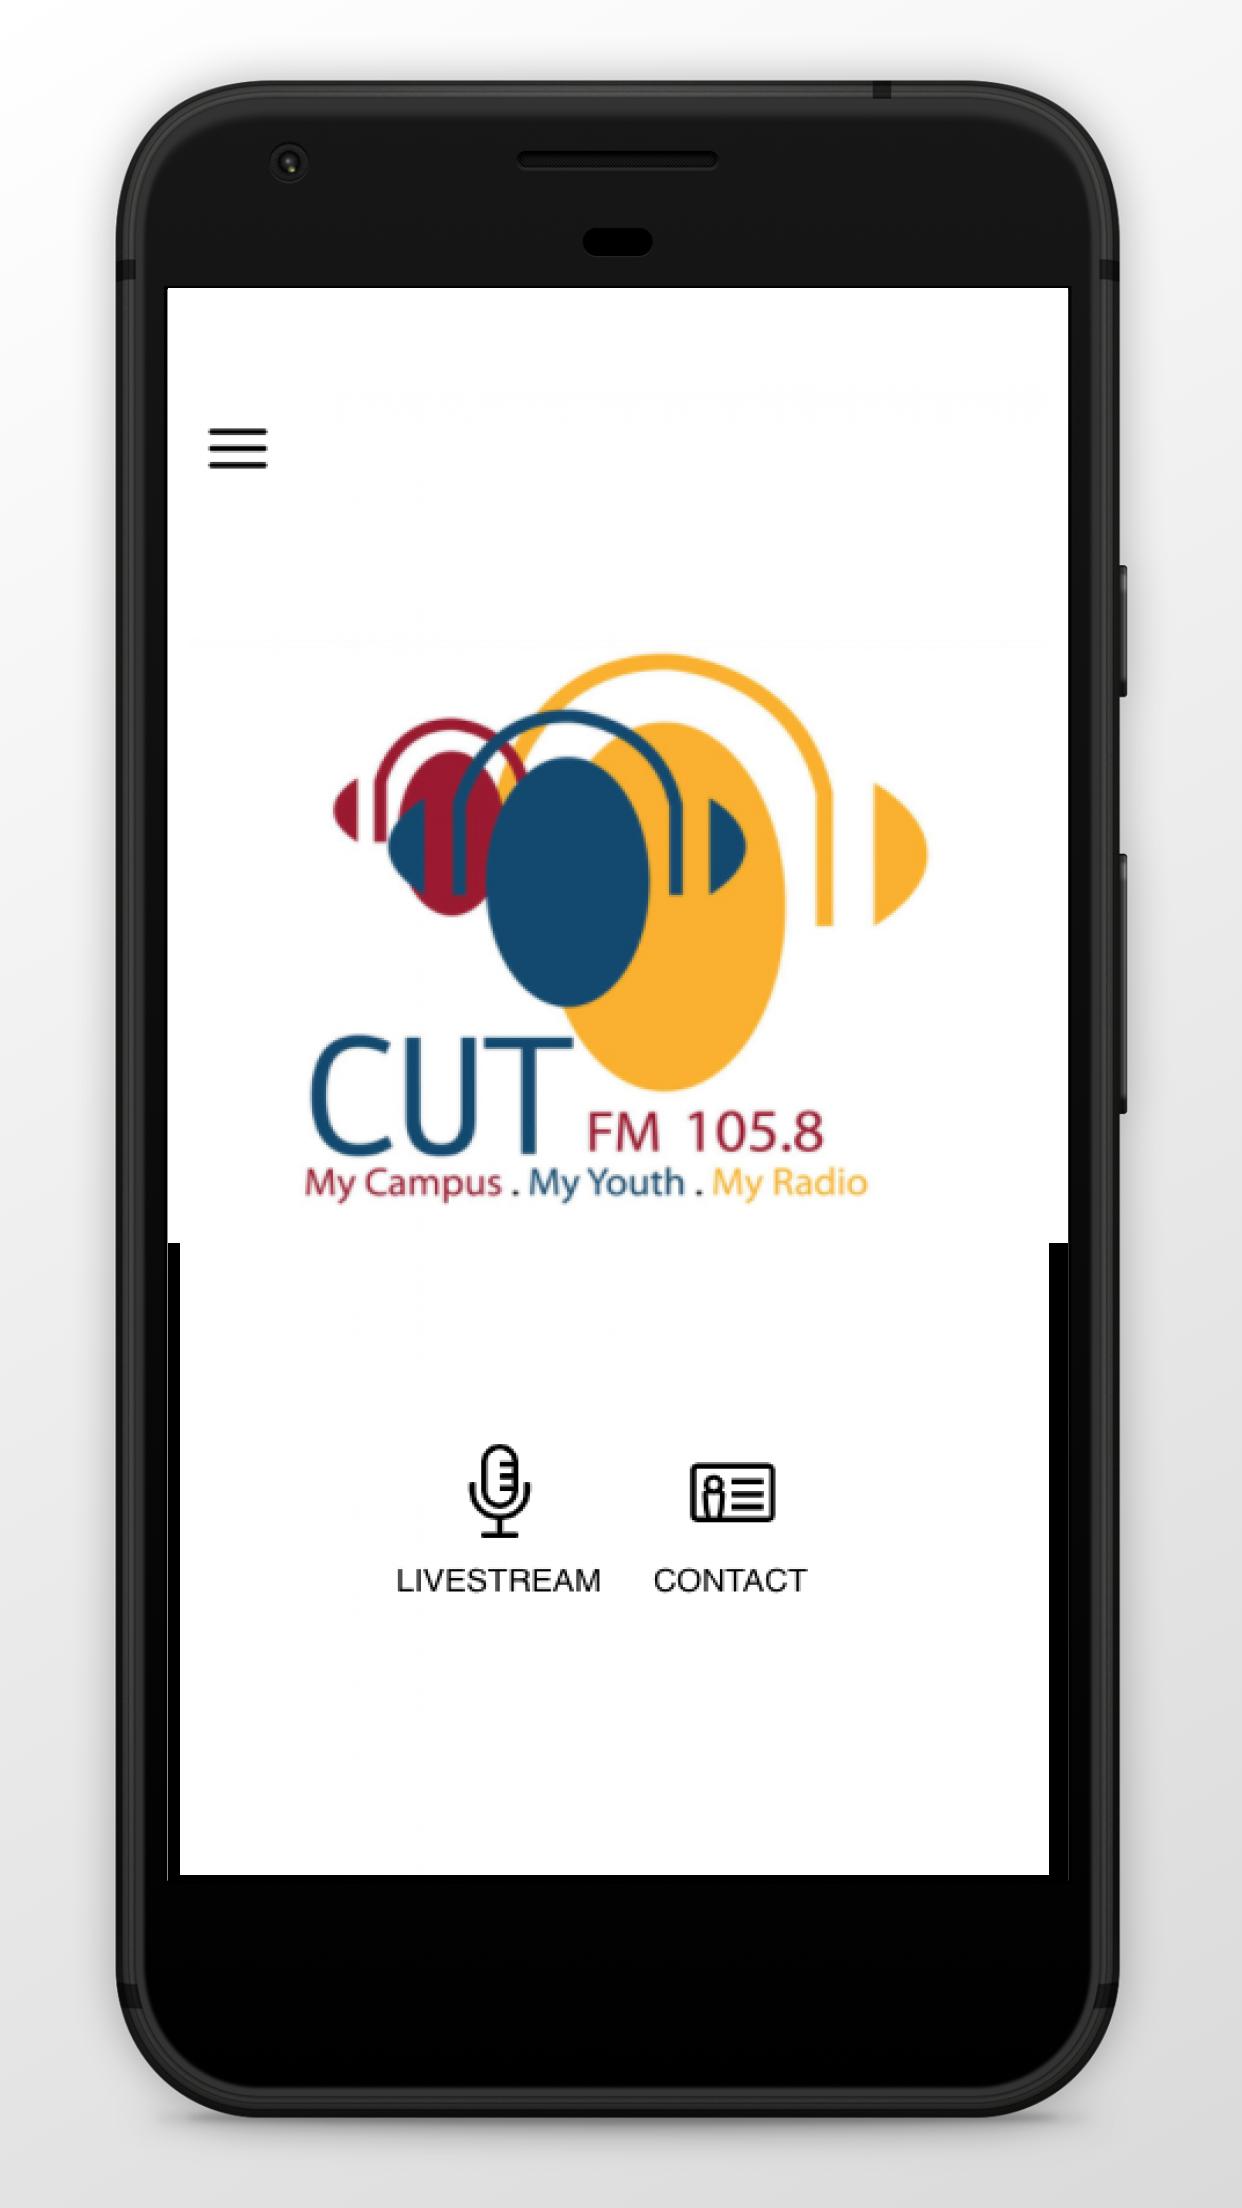 CUT FM 105.8 for Android - APK Download